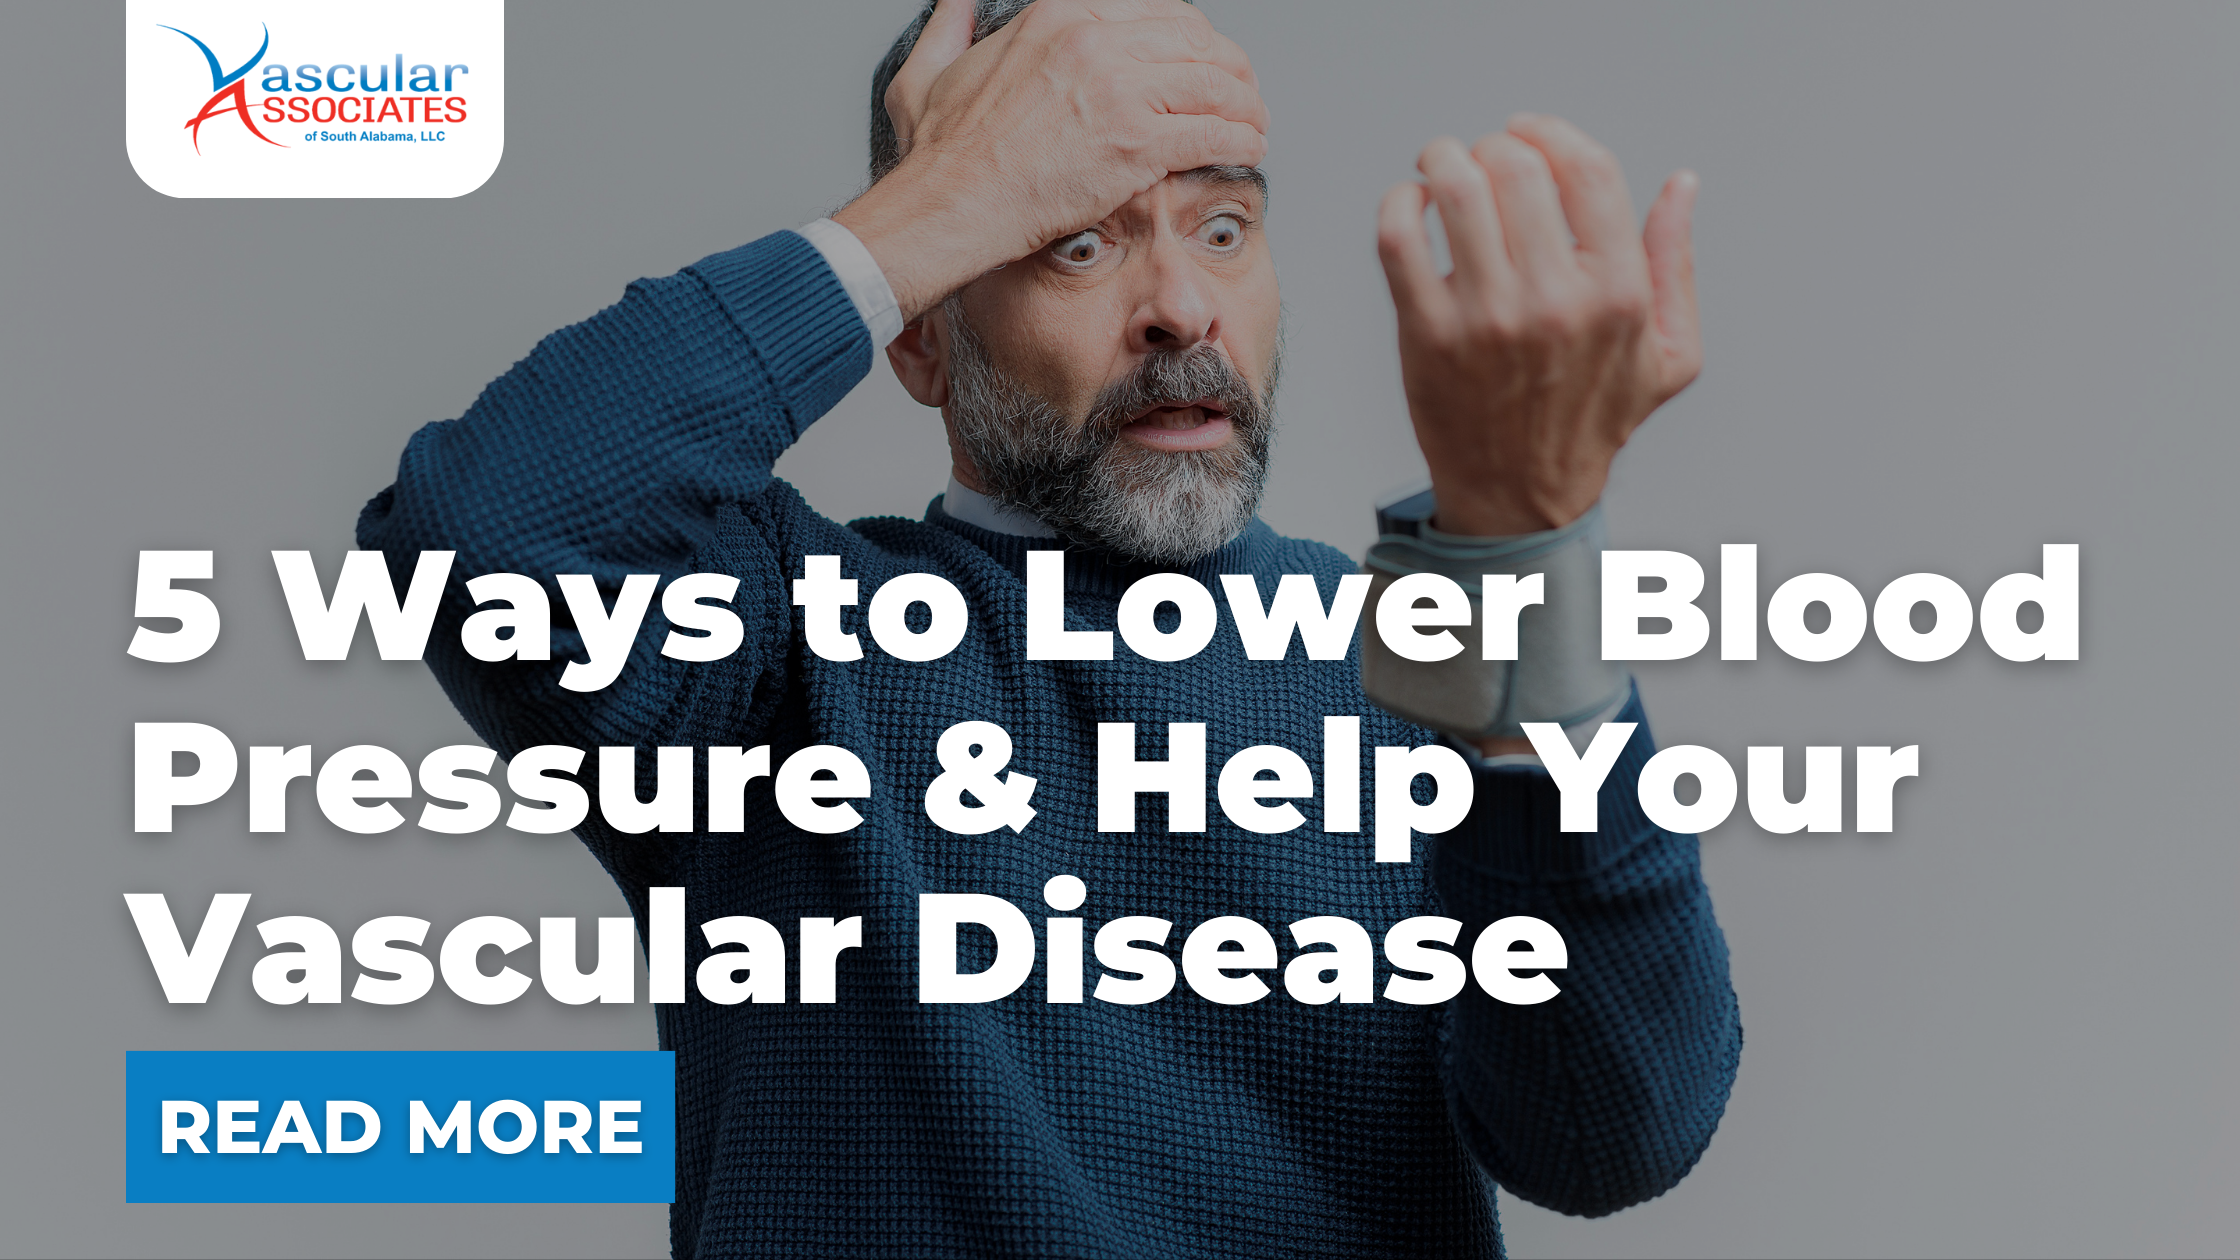 Vascular Blog - 5 Ways to Lower Blood Pressure and Help Your Vascular Disease.png